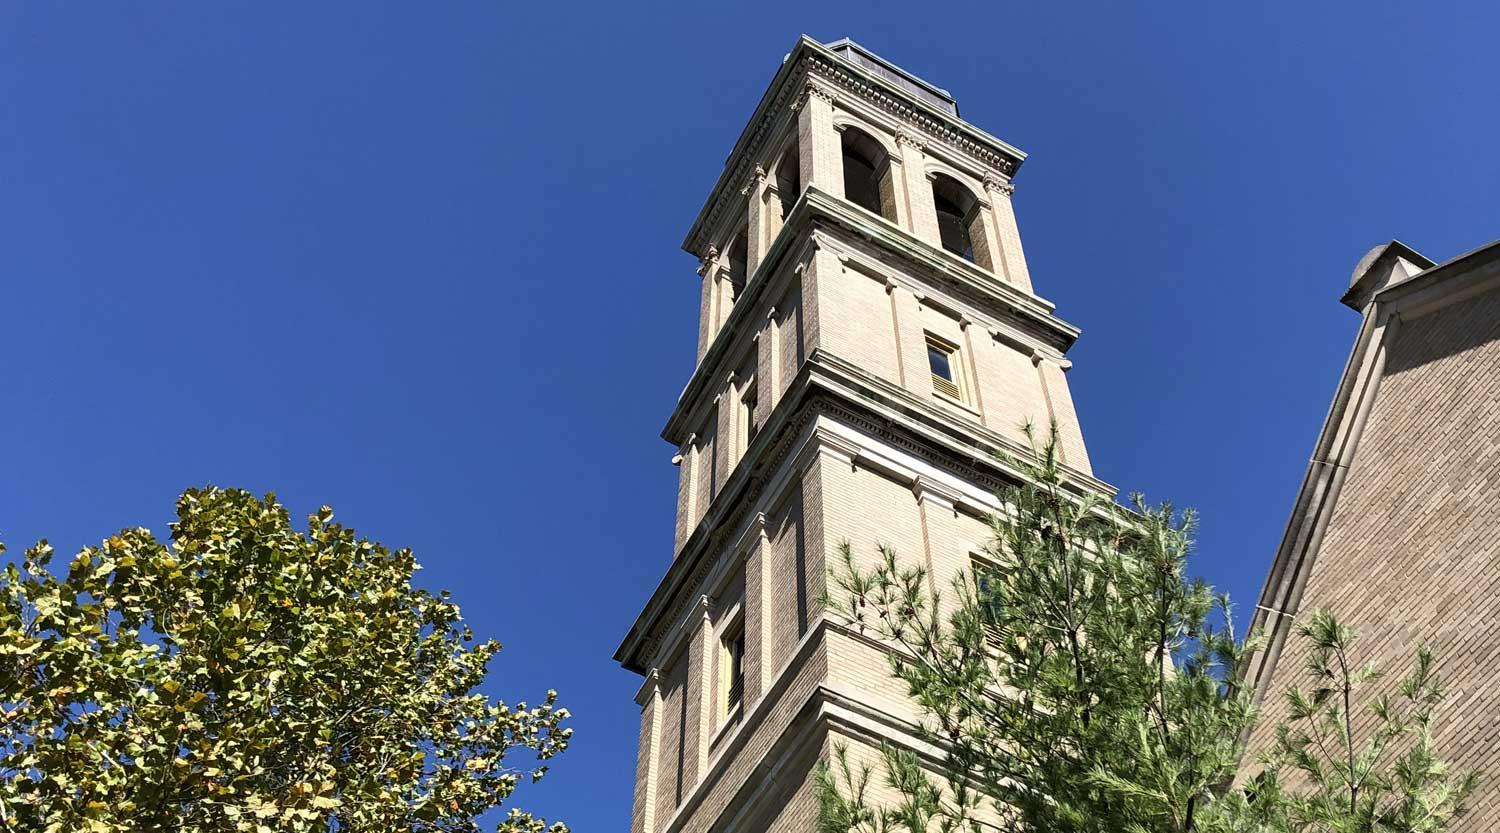 The bell tower of Indianapolis' Holy Cross Church